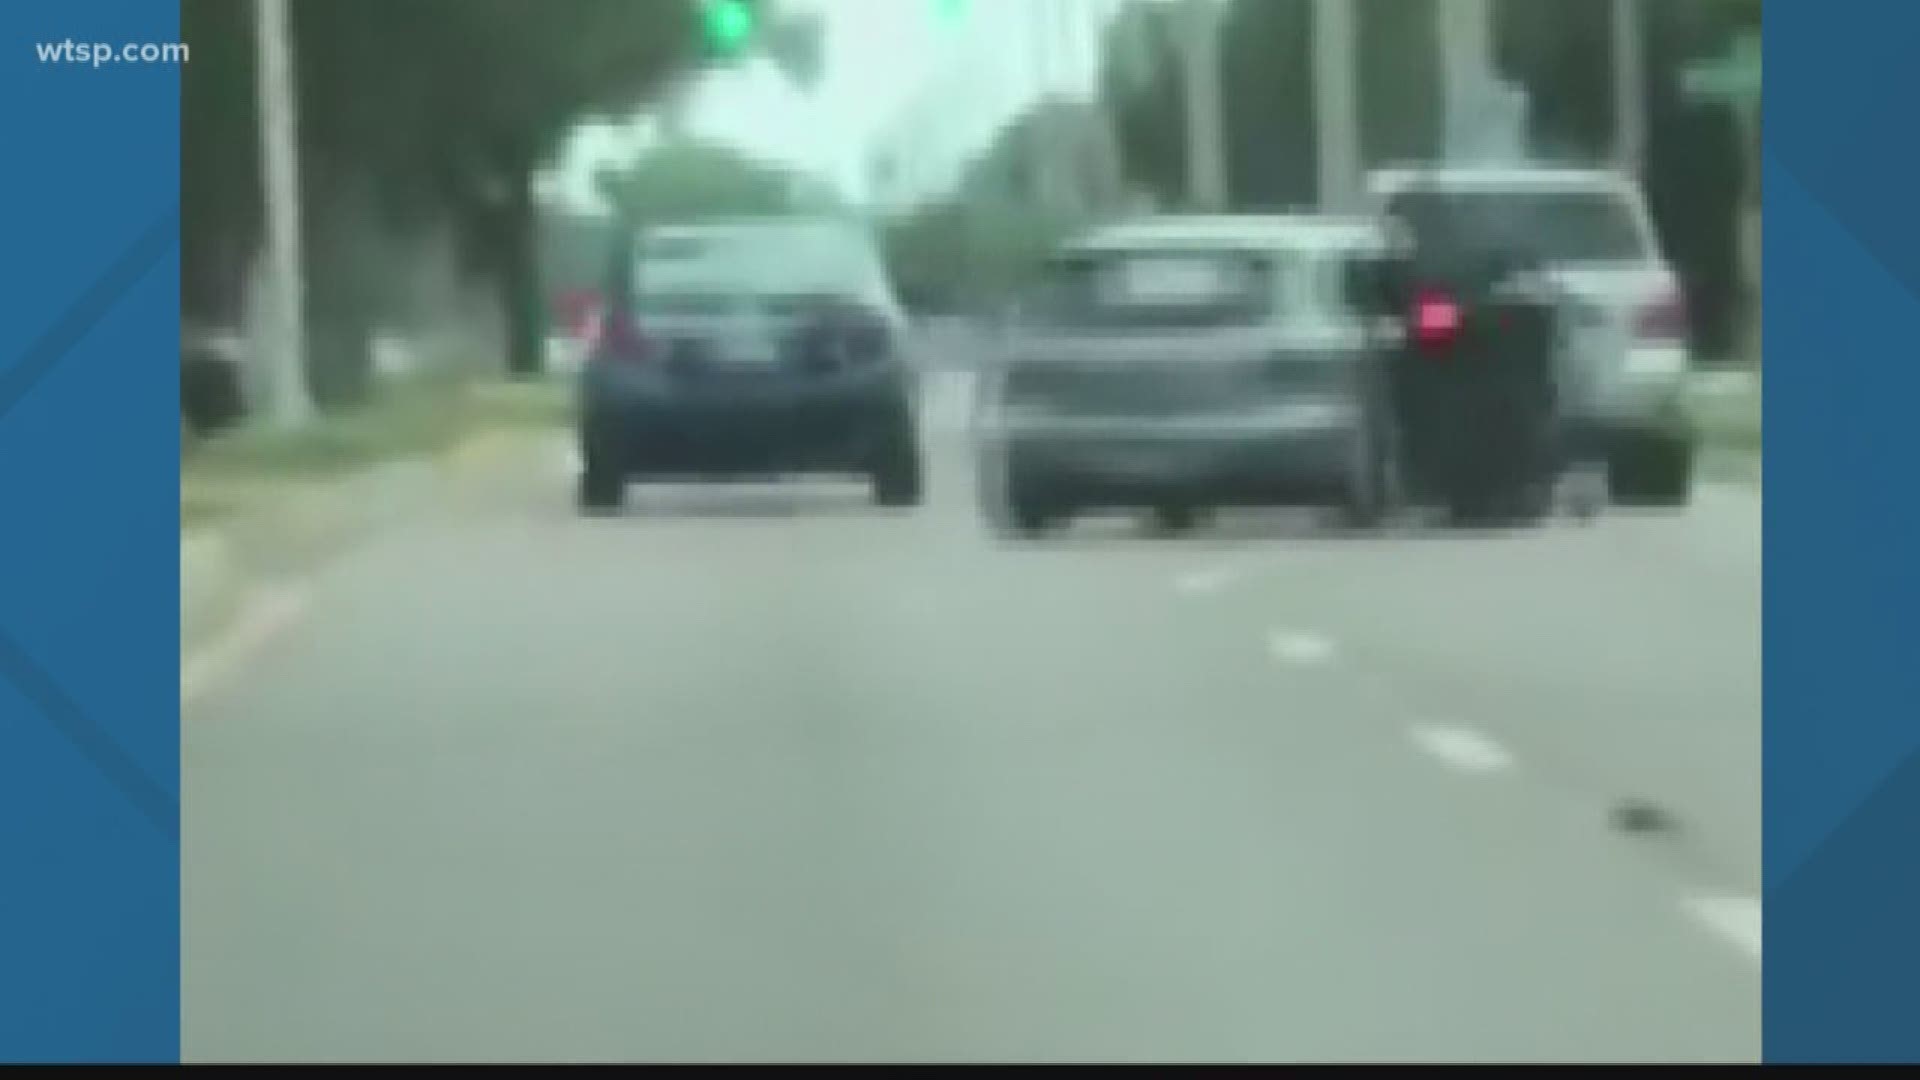 Sarasota investigators are looking into a road rage incident caught on camera.